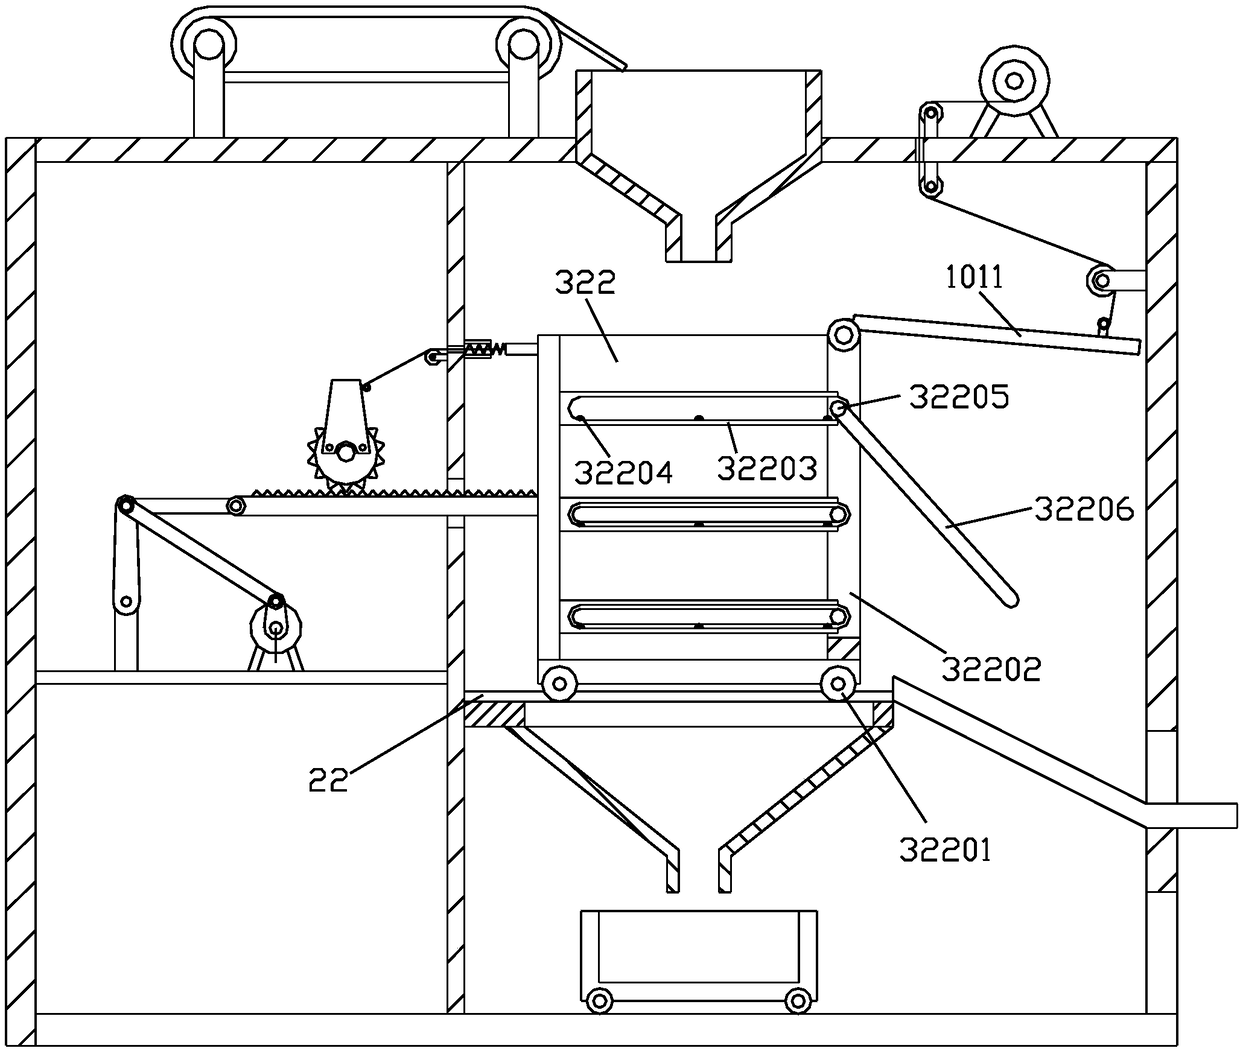 Gravel multi-stage screening device for building construction